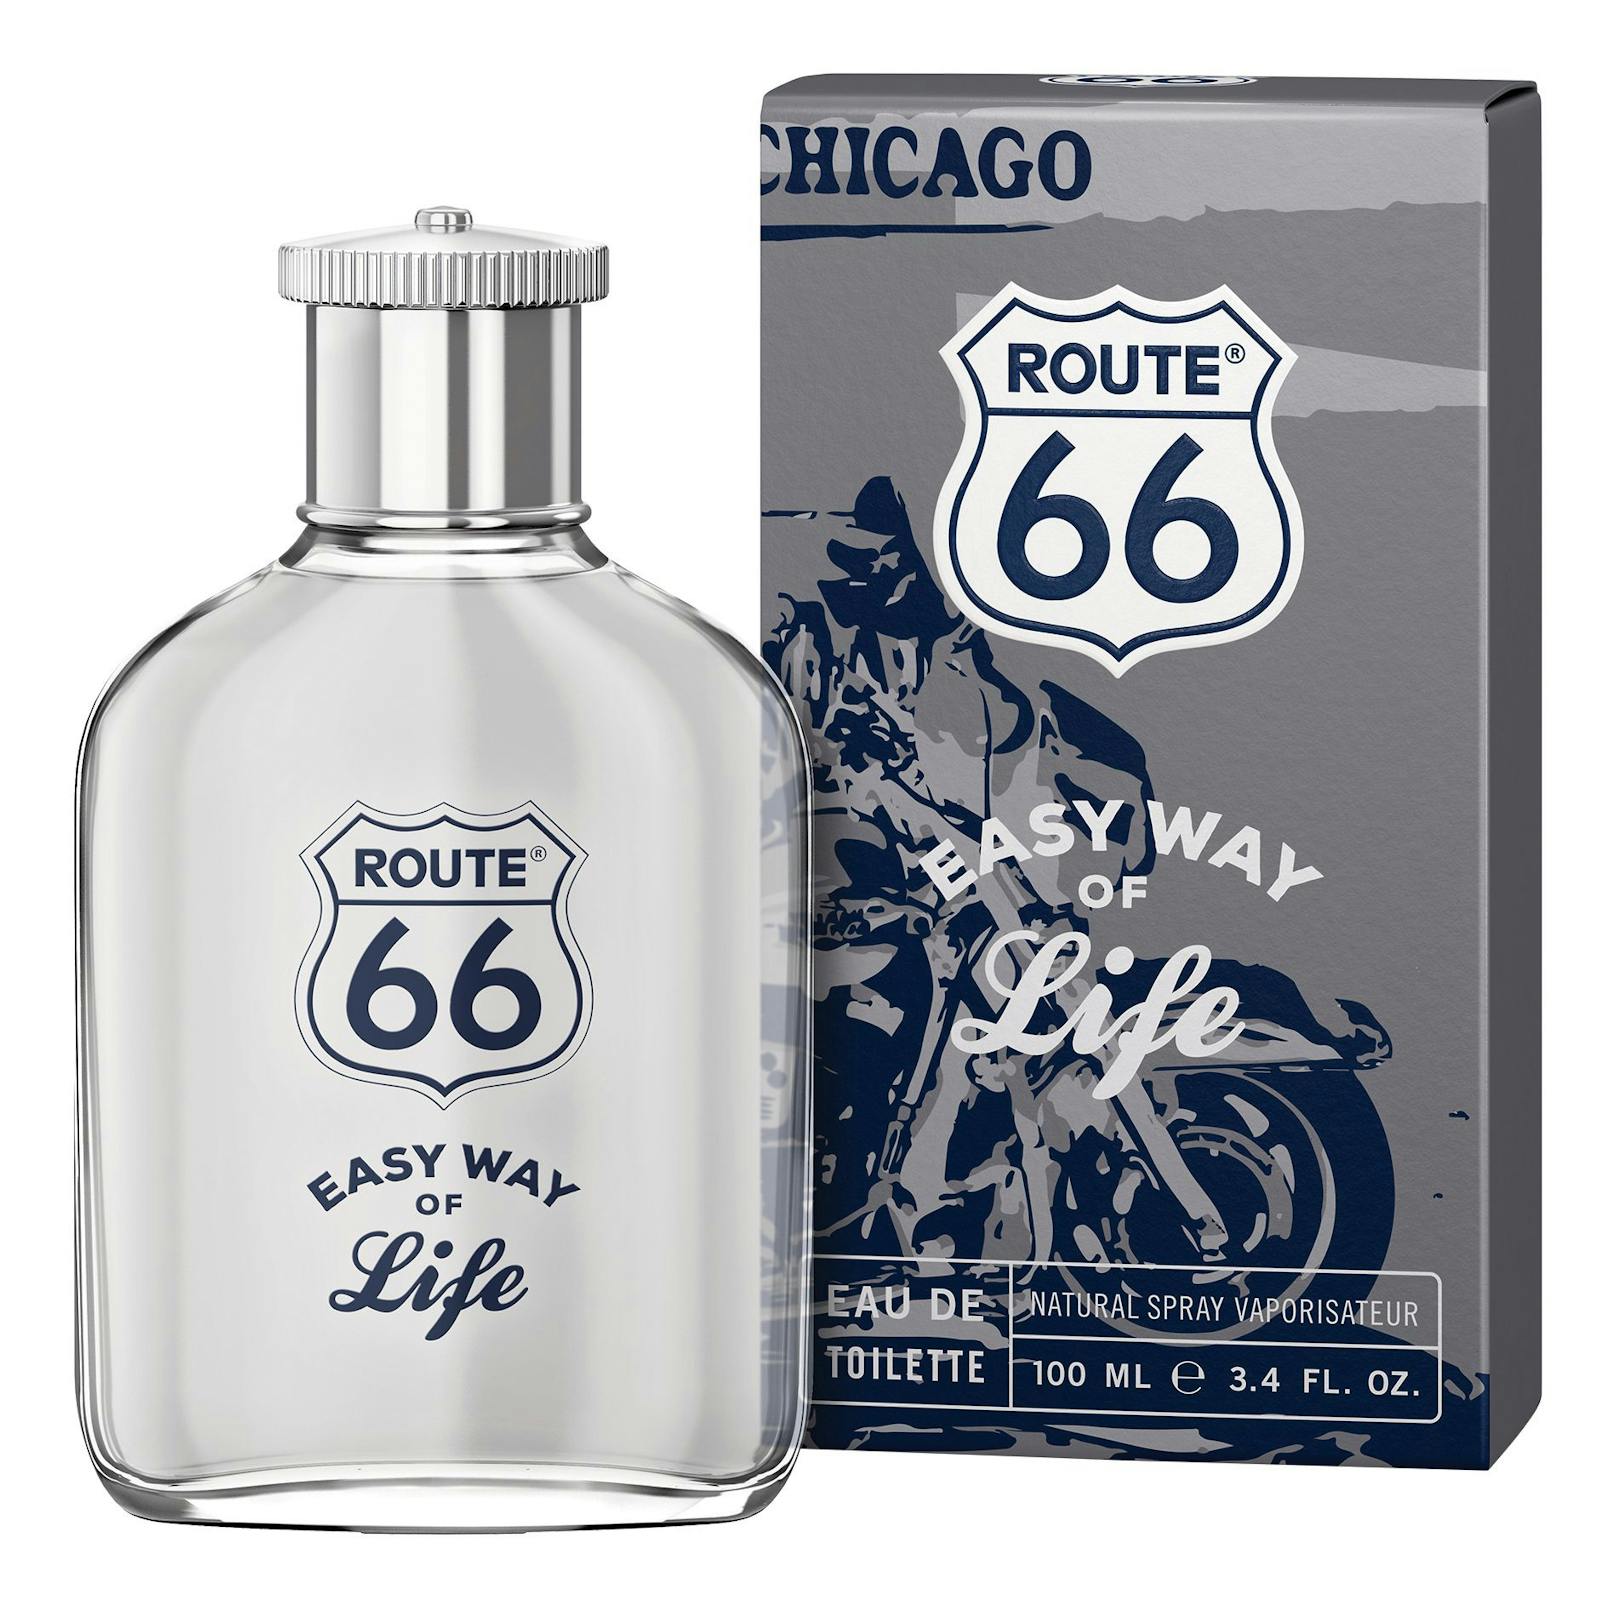 Route 66 "Easy Way Of Life"